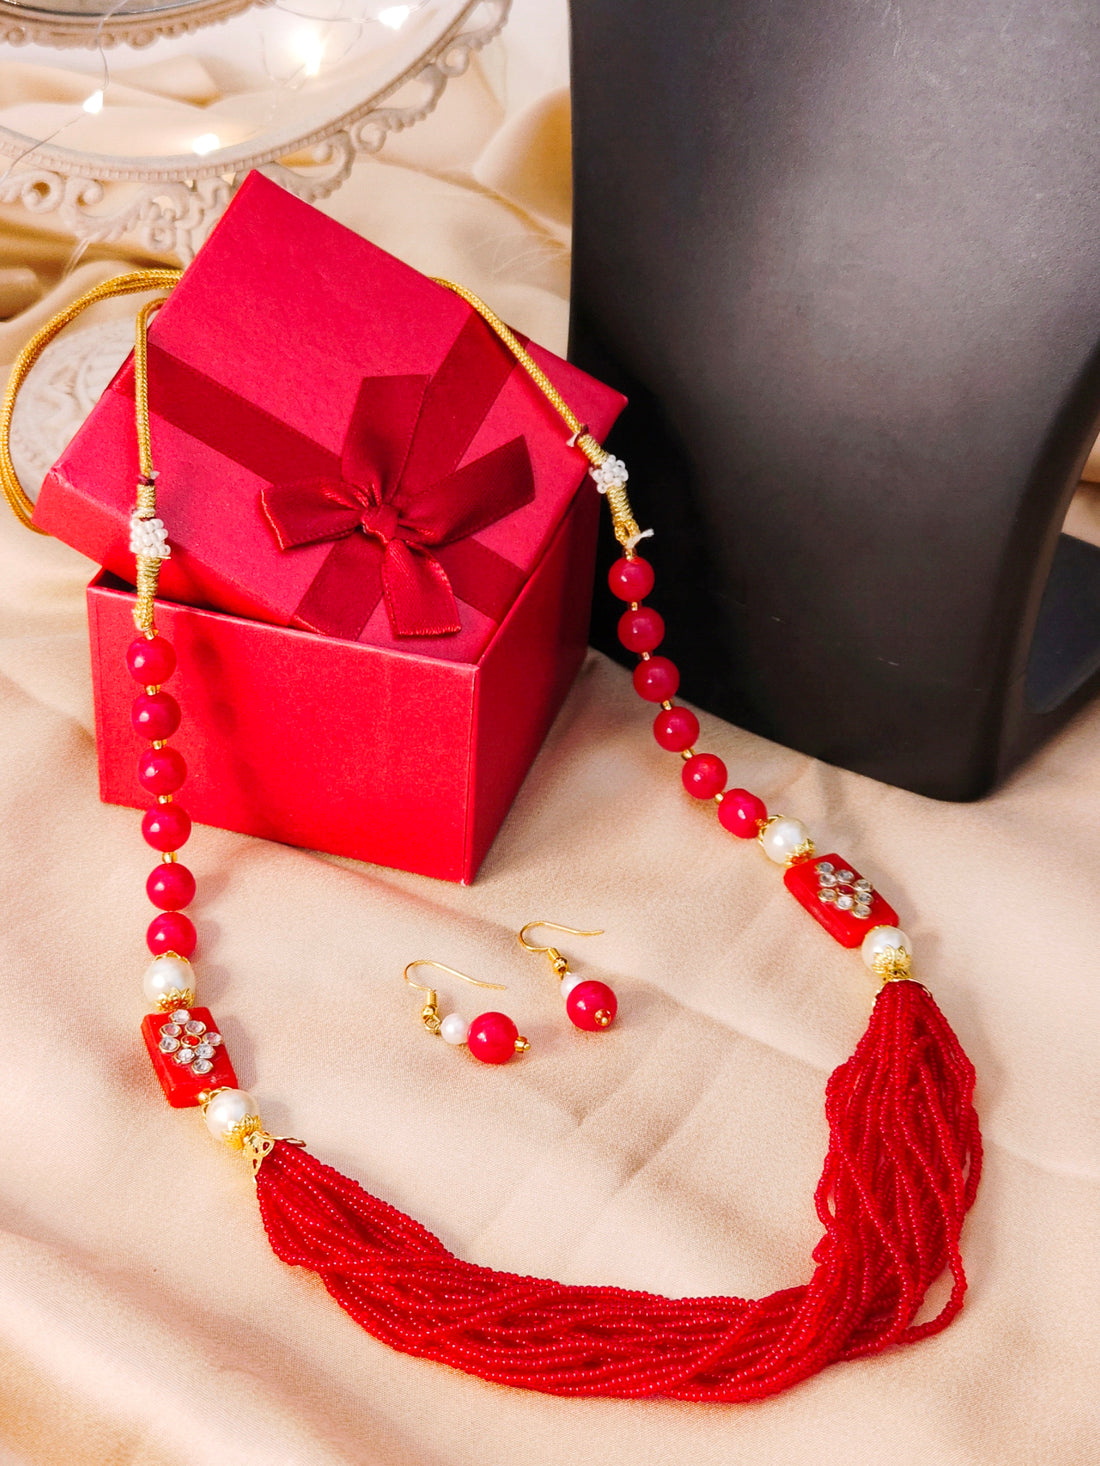 Moti Mala Necklace Set for Weddings, Festivals & Gifting from the house of Mrigaya by Nandini- Red Beads Necklace - Mrigaya India